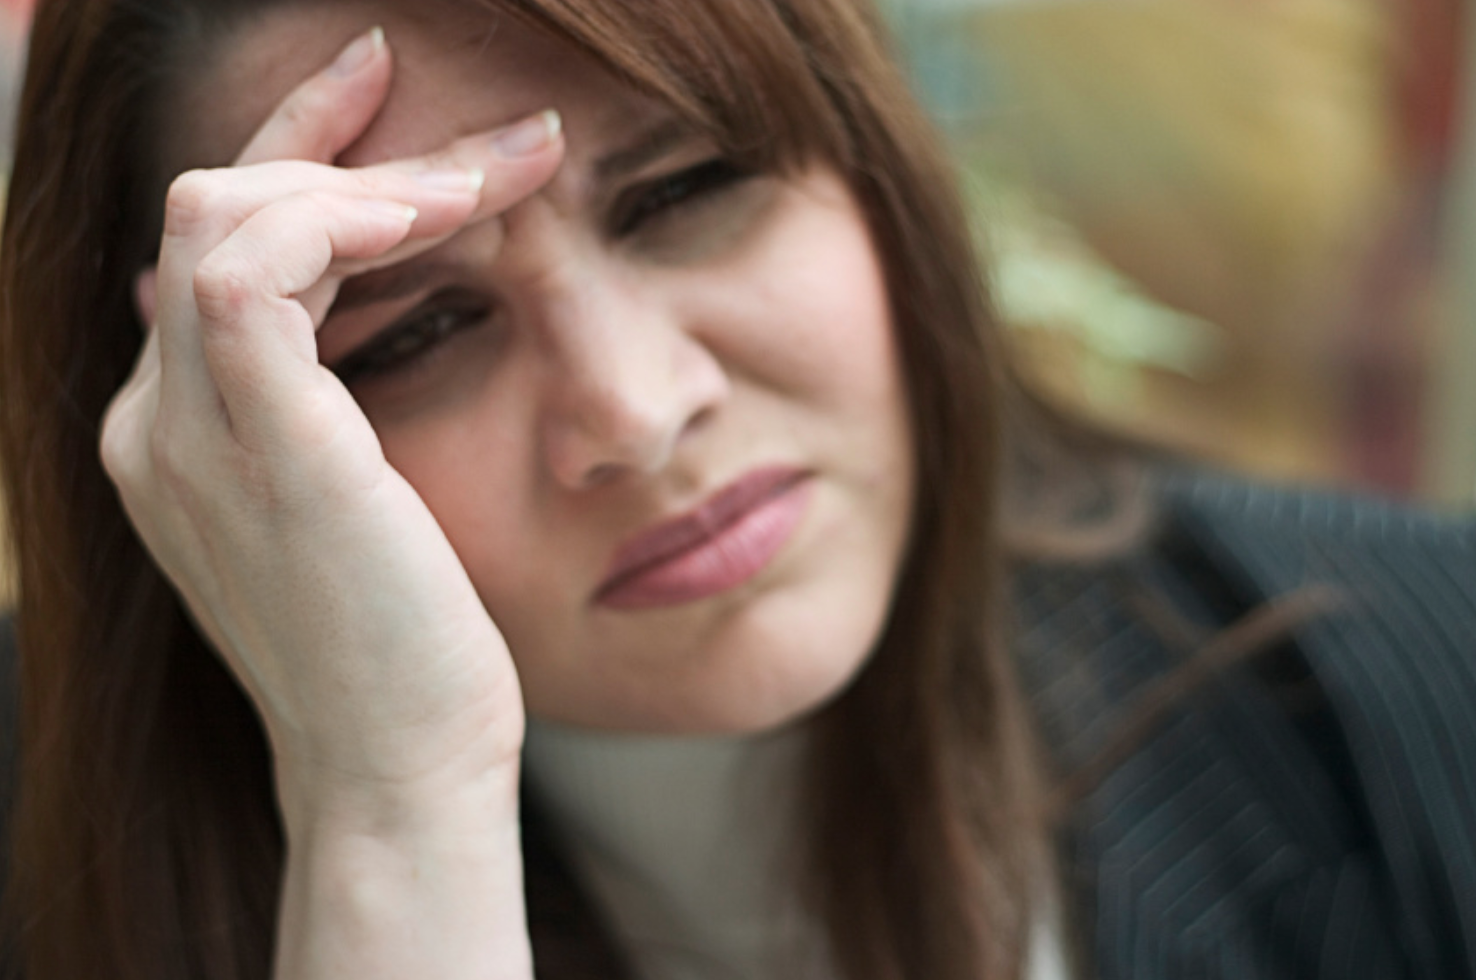 A Large Proportion of Medical Students Experience Migraines, Choose to Self-Manage Symptoms